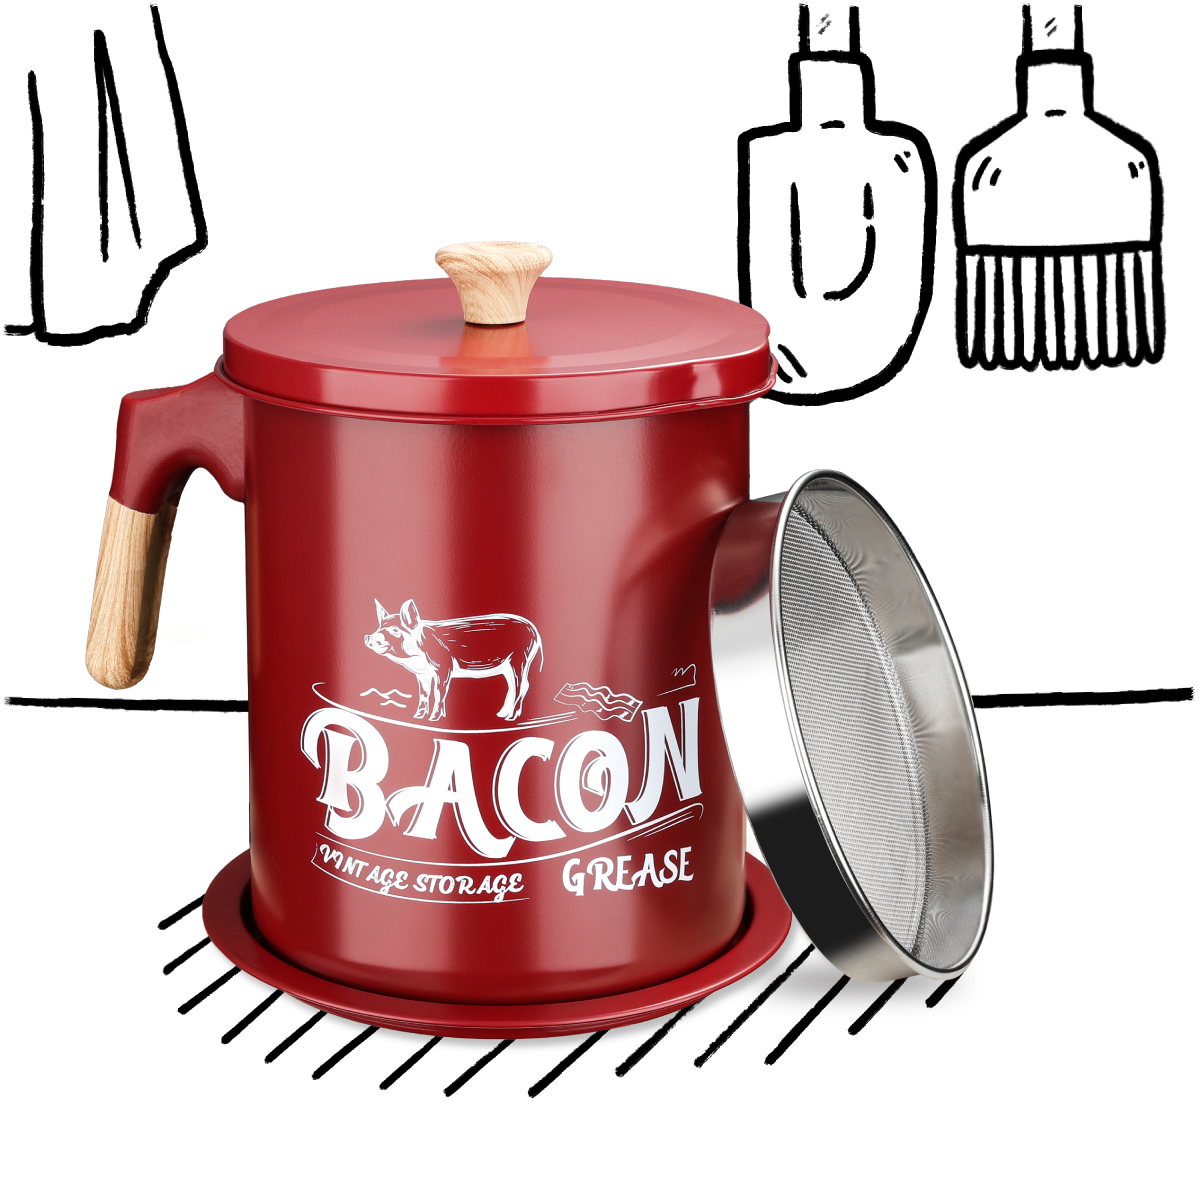 red bacon grease catcher with black line illustration as background 